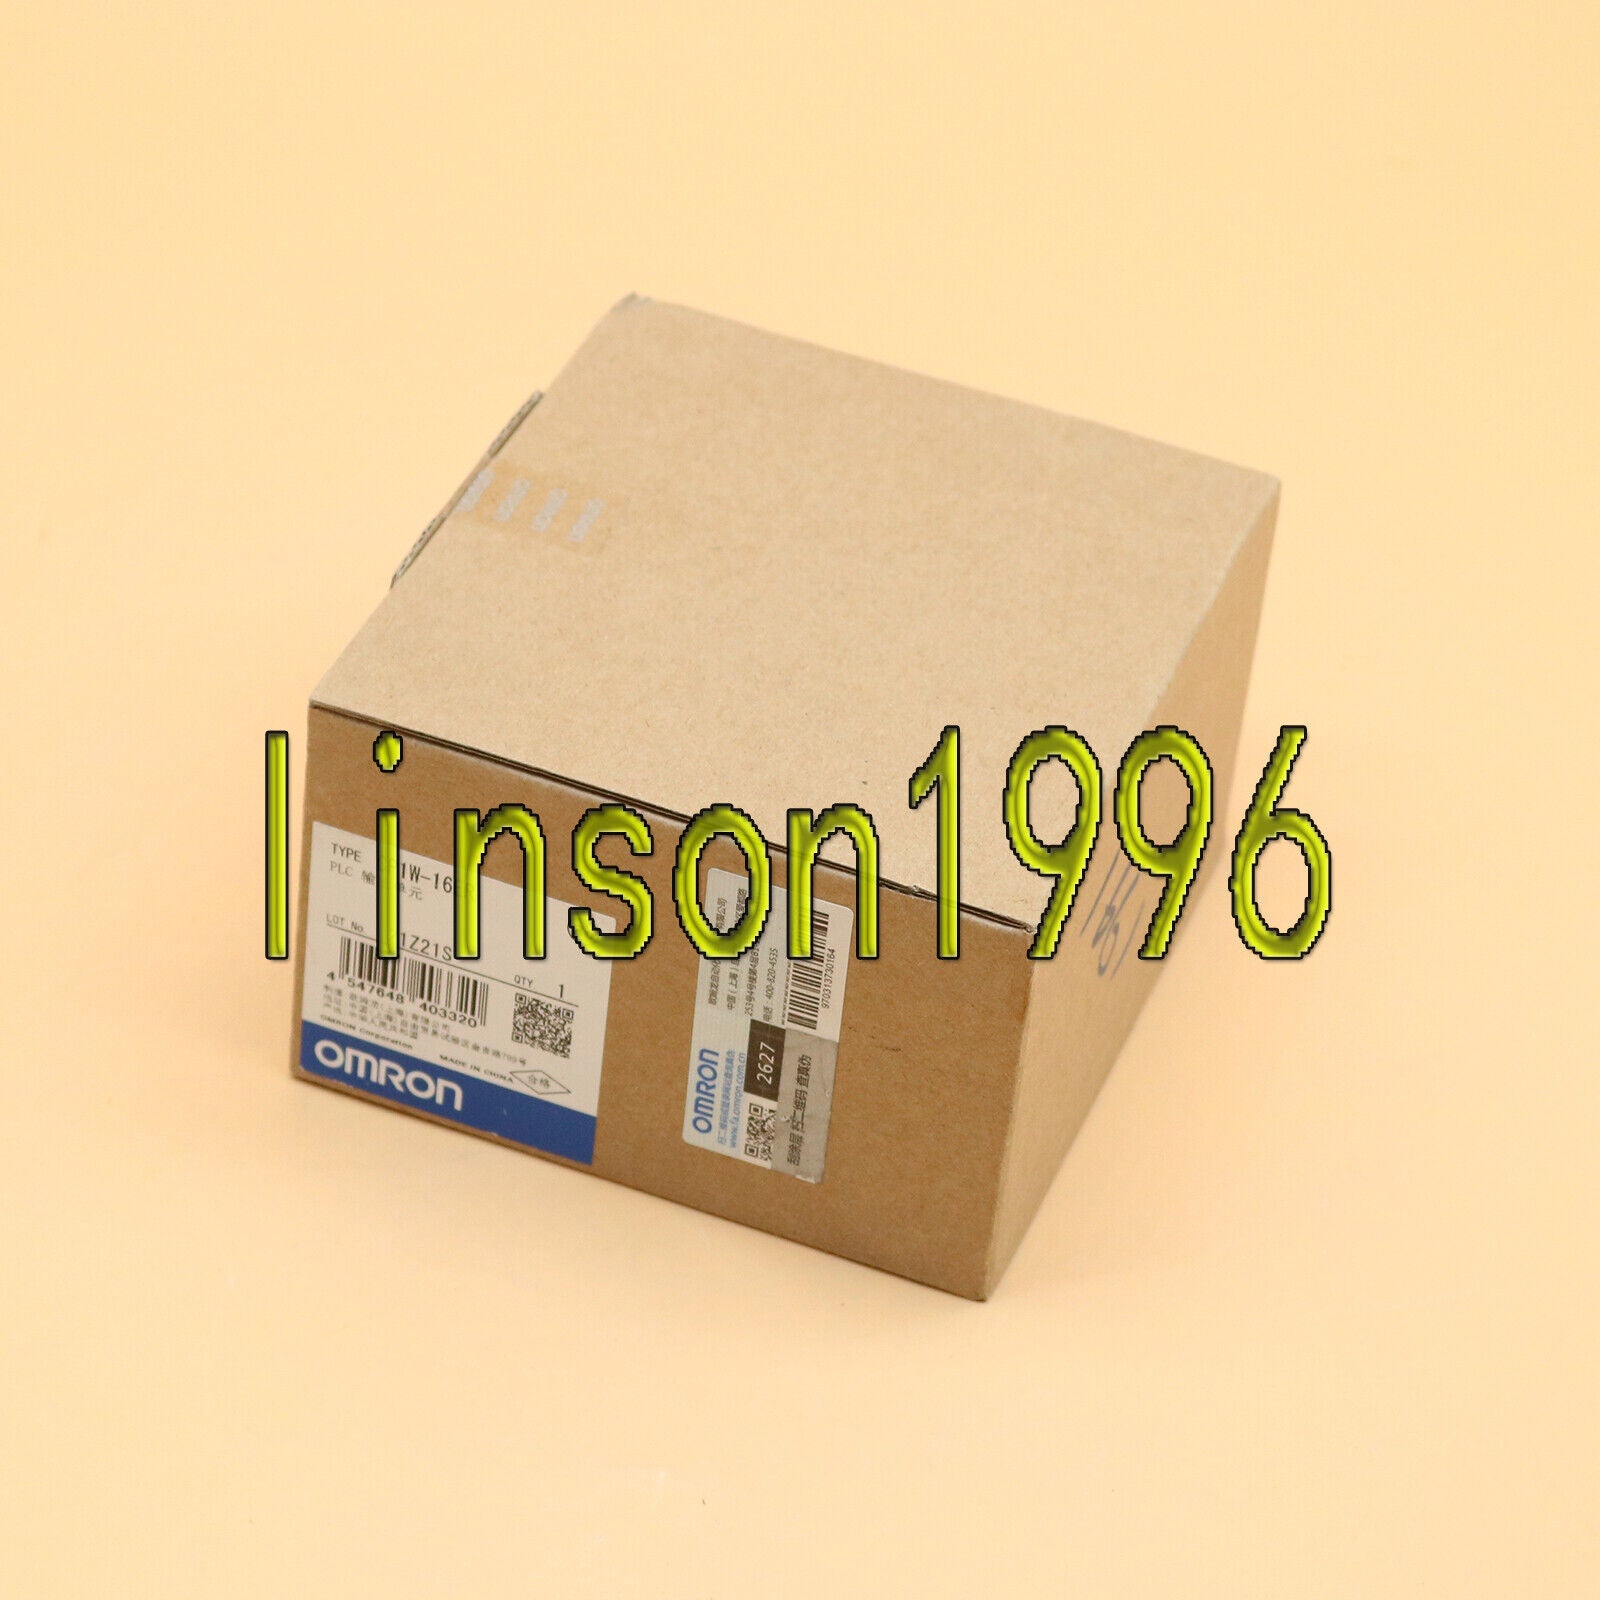 new ONE  Omron CP1W-16ER PLC Extension Module IN BOX SHIP